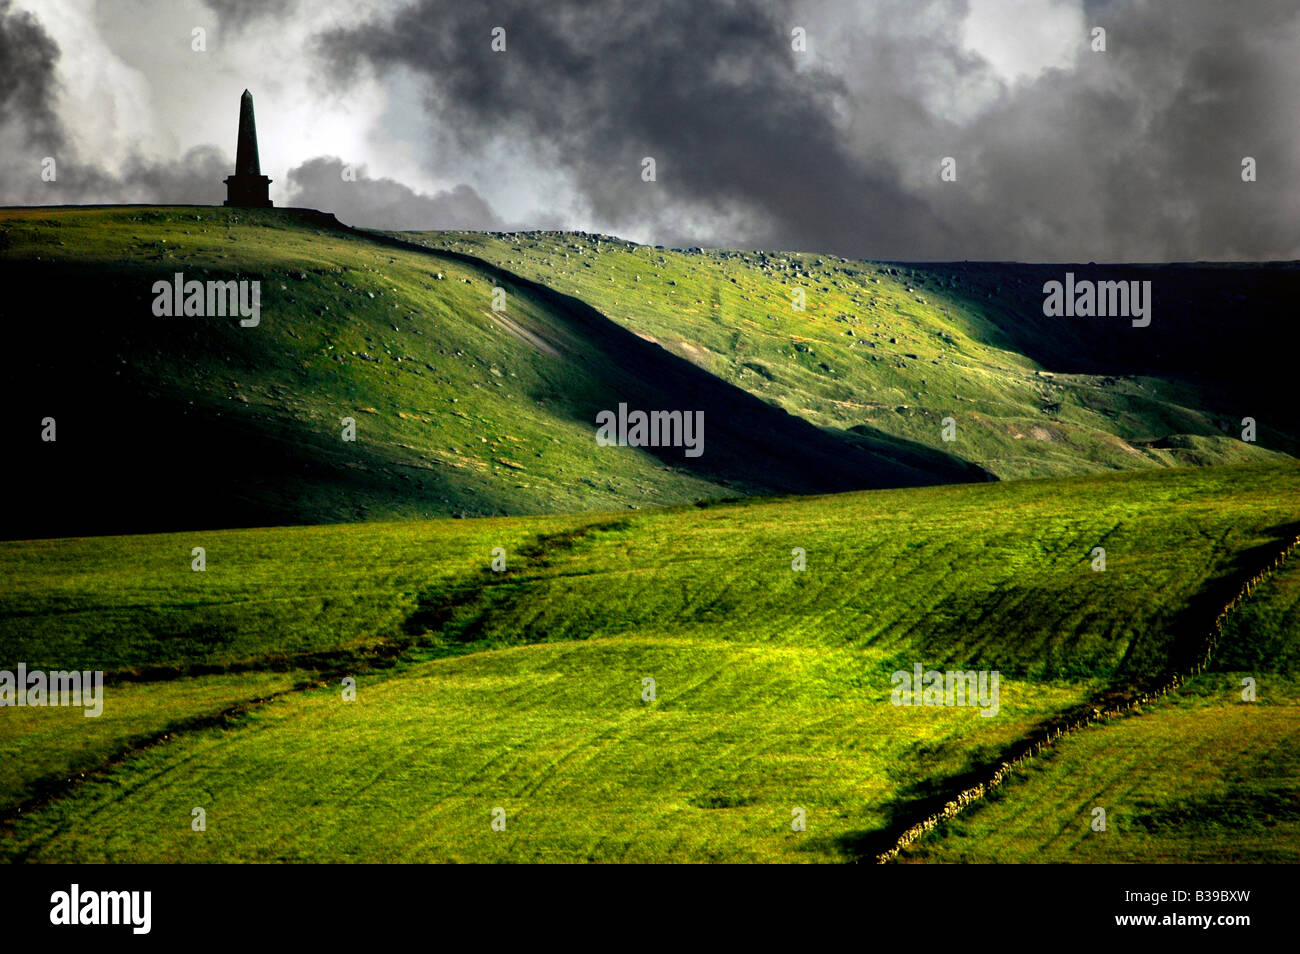 STOODLEY PIKE MONUMENT CALDERDALE WEST YORKSHIRE UK BUILT TO CELEBRATE VICTORY AT THE BATTLE OF WATERLOO Stock Photo